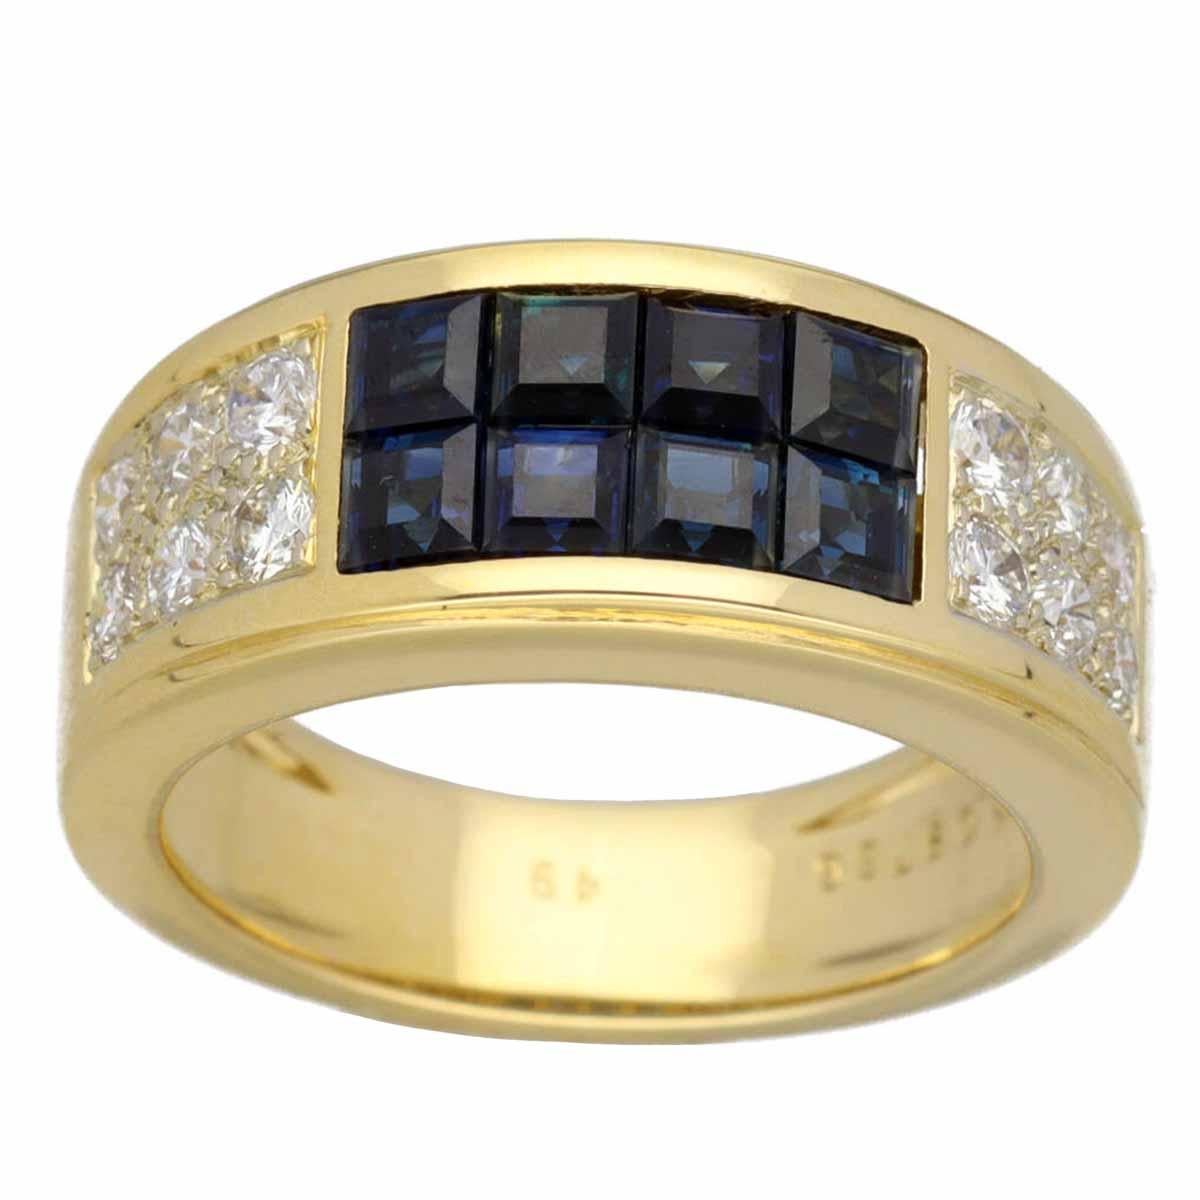 Brand:Cartier 
Name:Diabolo Invisible Set Blue Sapphire Diamond Ring
Material :12P Diamond, 8P Blue Sapphire, 750 K18 YG Yellow Gold
Comes with:Cartier box, case, Cartier repair certificate (May 2019)
Ring Size:British & Australian:J 1/2  /   US &